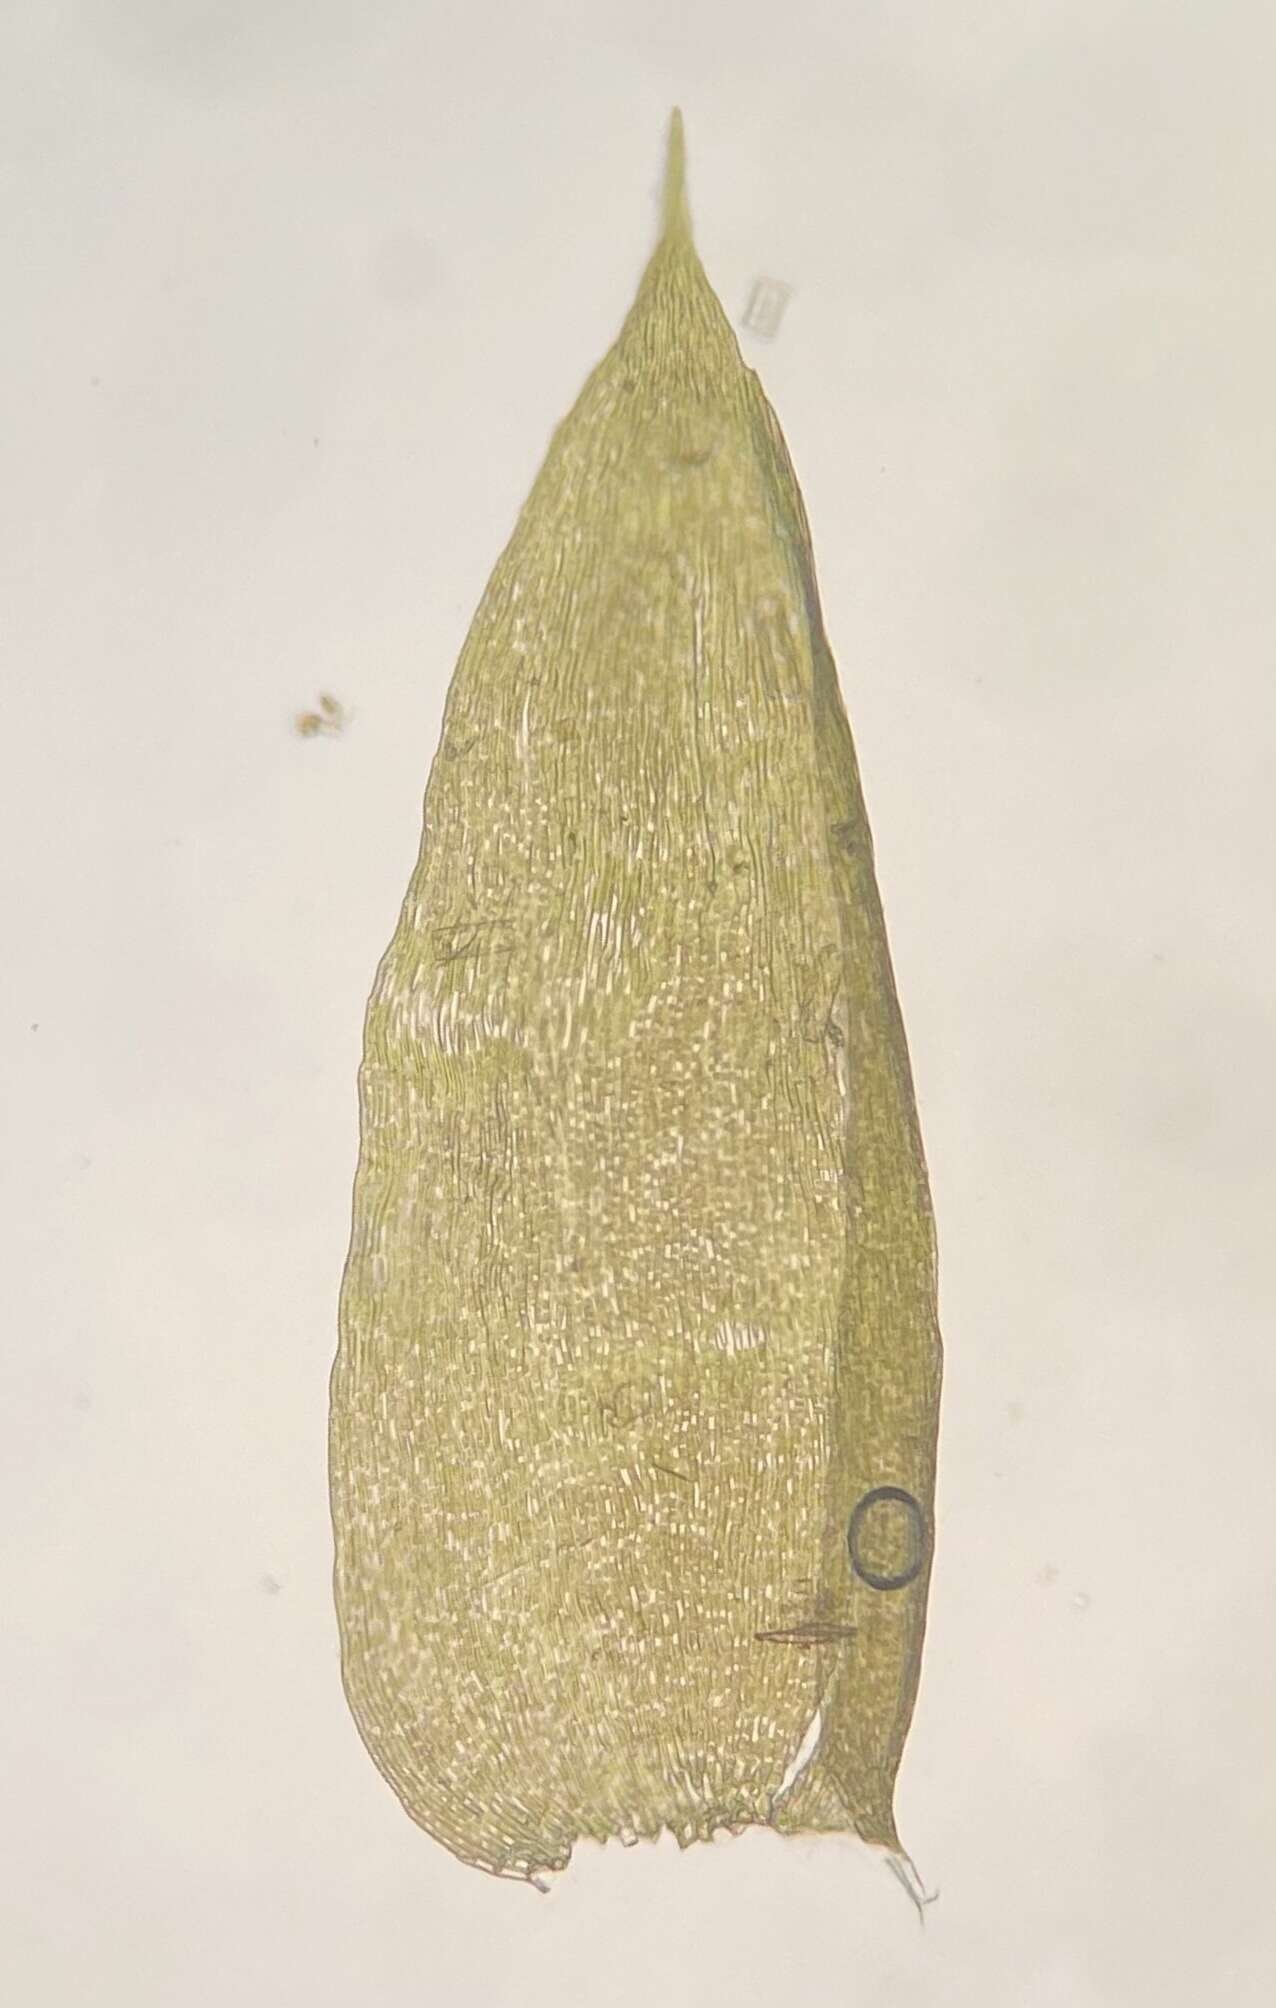 Image of Mueller's isopterygiopsis moss